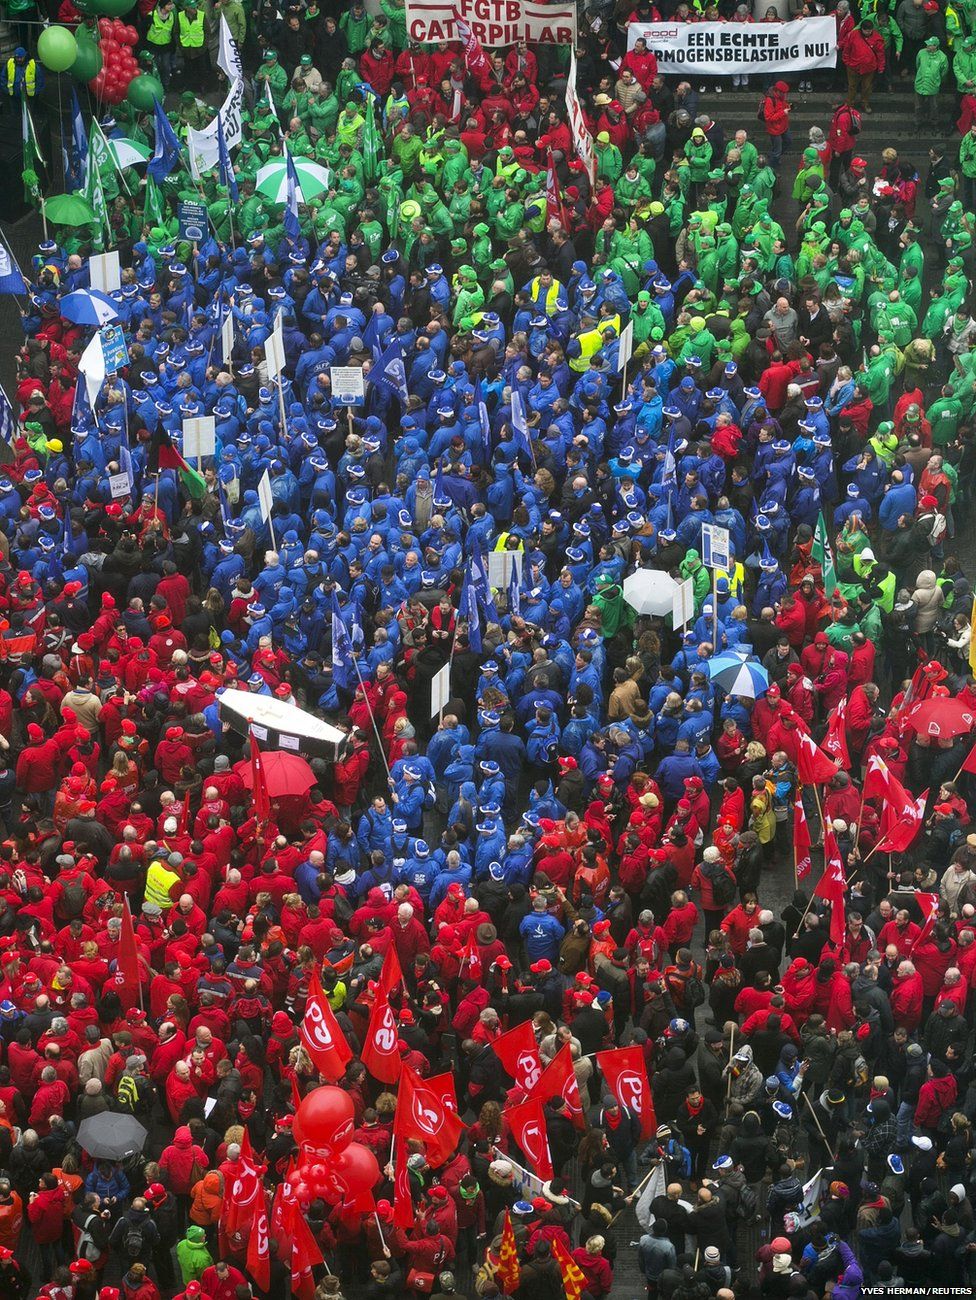 Protesters wearing red (Socialists), blue (Liberals) and green (Christian Democrats) vests gather in central Brussels during a trade union meeting